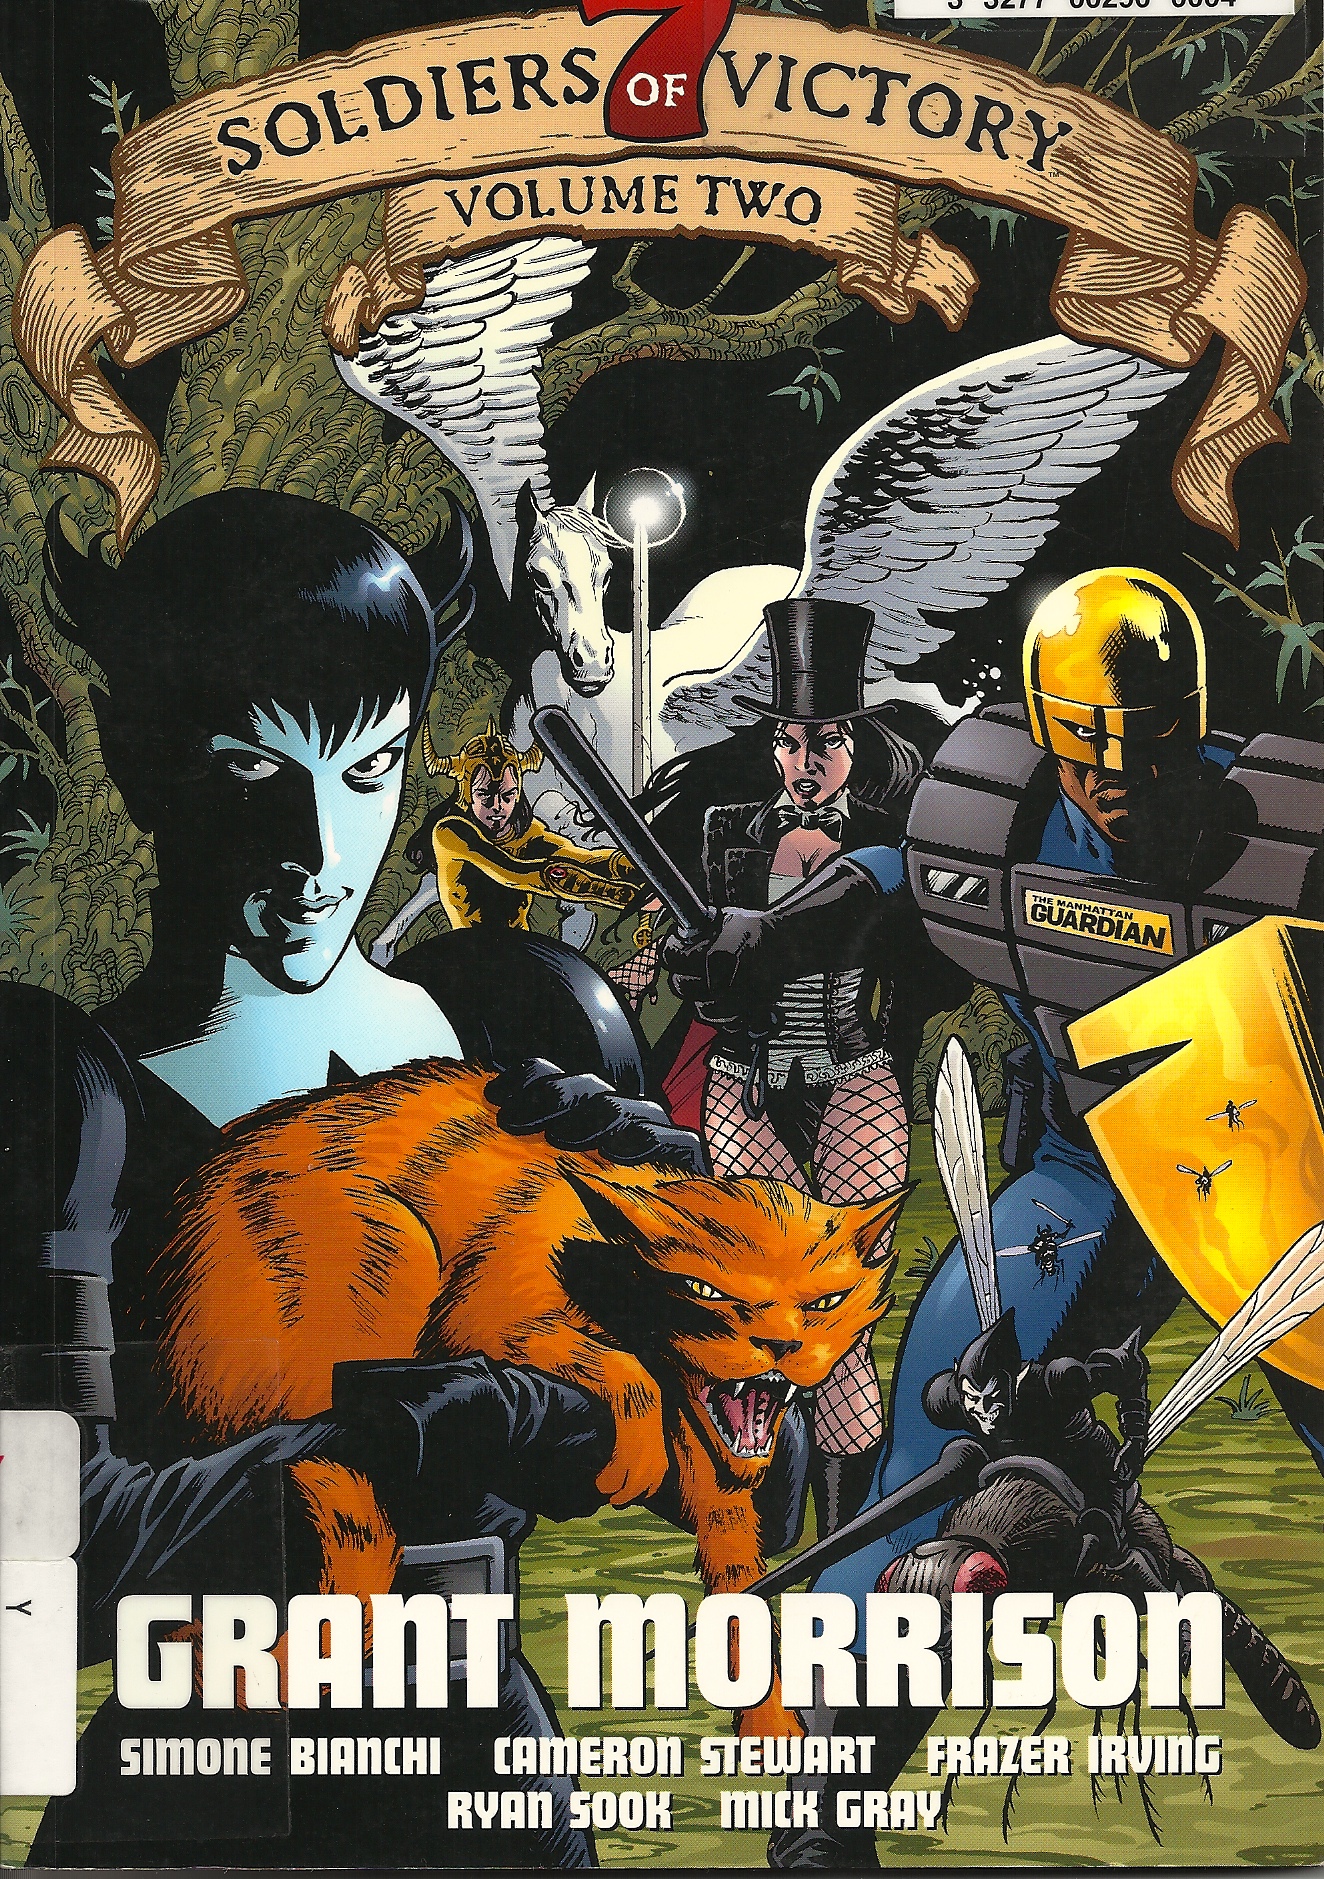 Seven Soldiers of Victory, Vol. 3 Grant Morrison